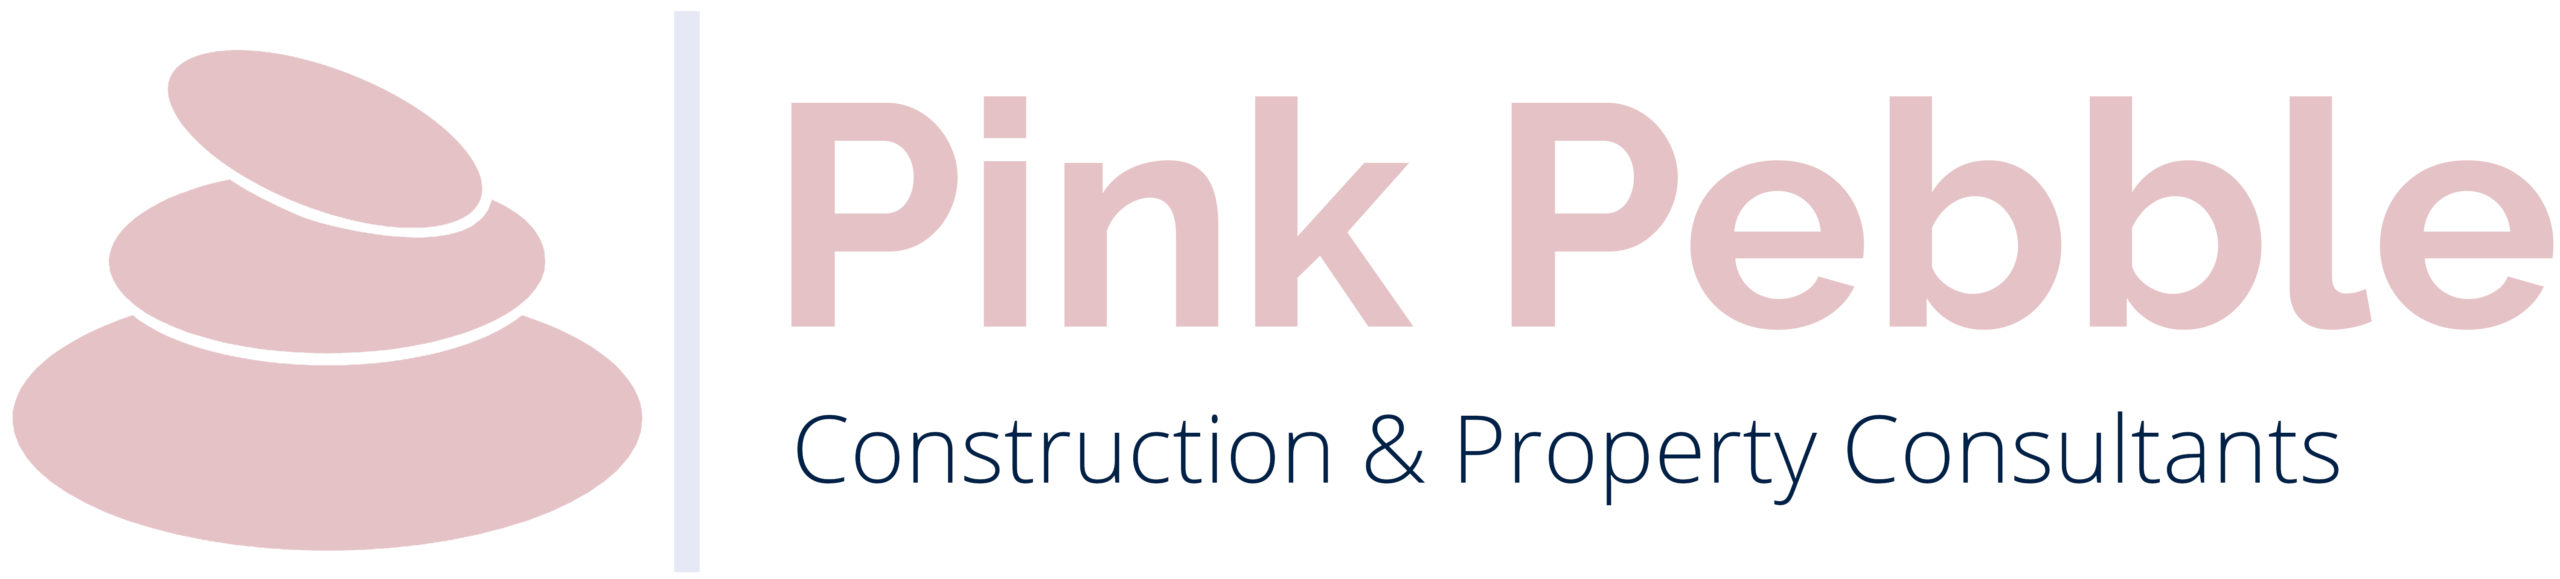 Linked logo for Pink Pebble Consulting Limited